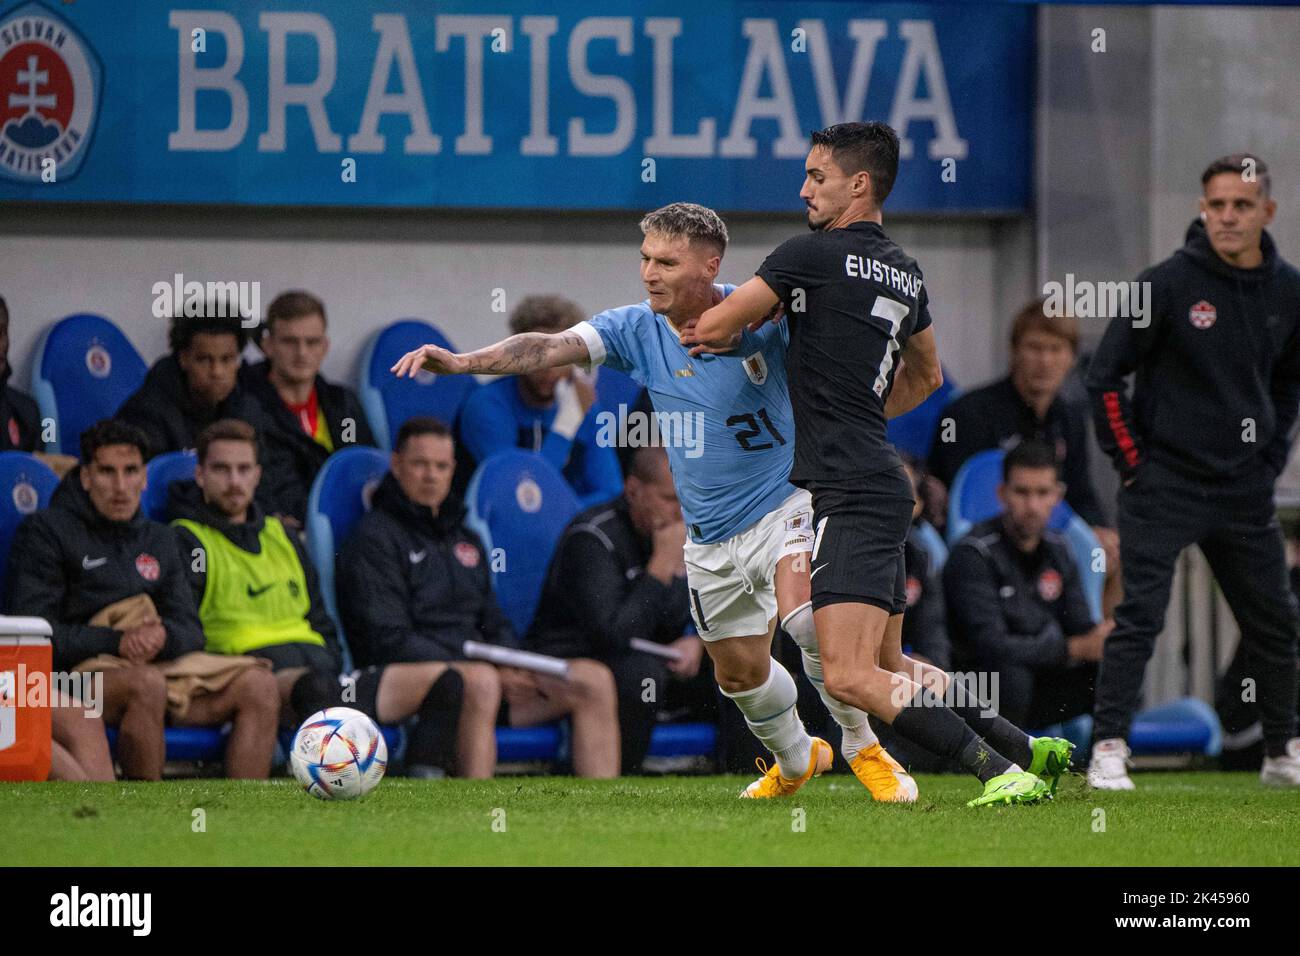 BRATISLAVA, SLOVAKIA - SEPTEMBER 27: Guillermo Varela of Uruguay and Stephen Eustaquio during the international friendly match between Uruguay and Can Stock Photo